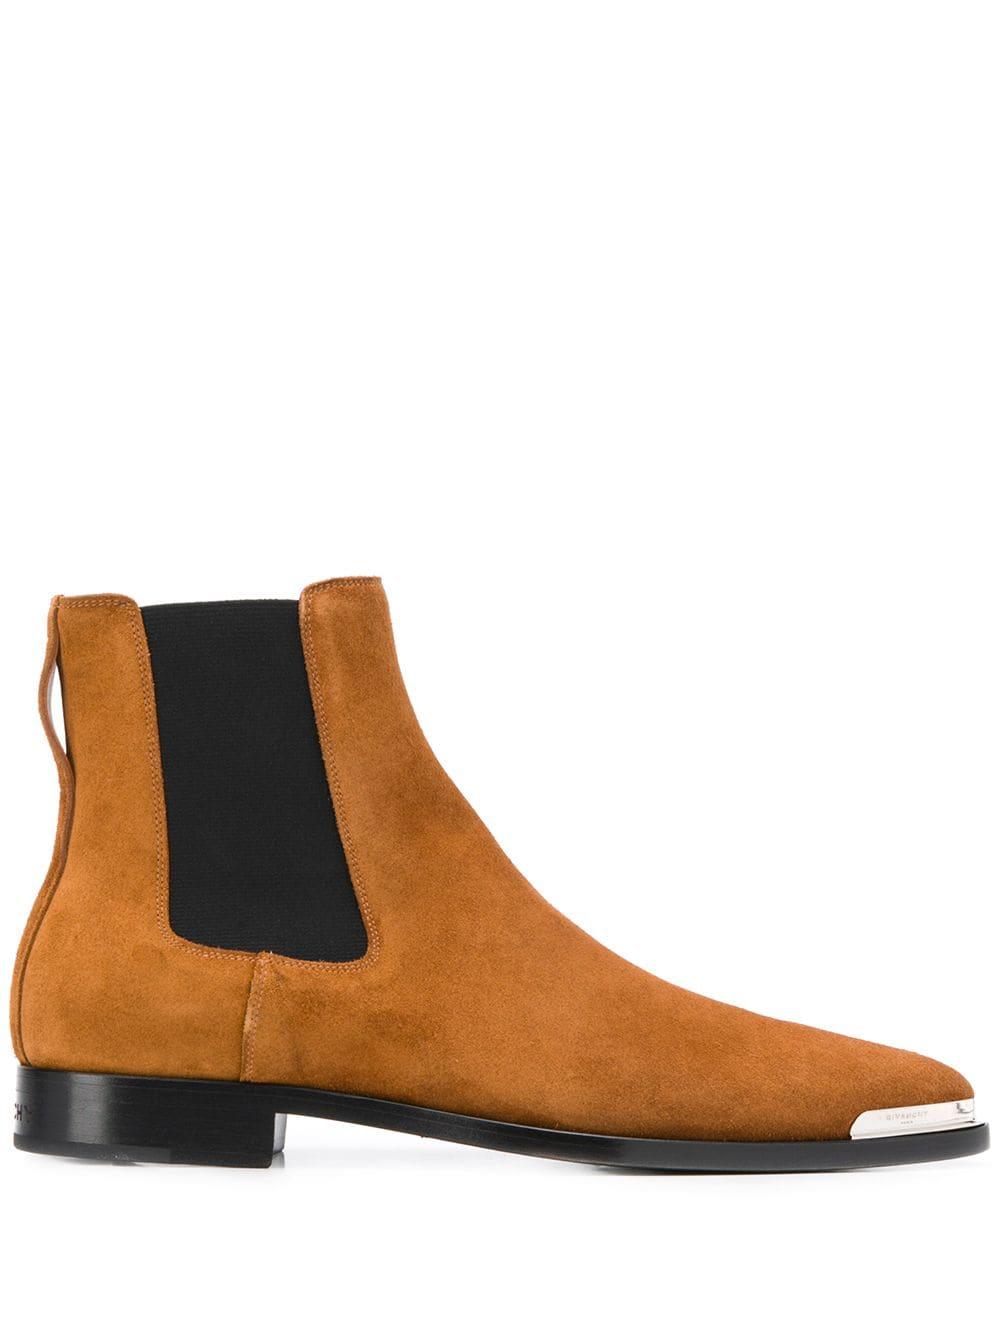 Givenchy Metal Tip Boots in Brown for Men | Lyst